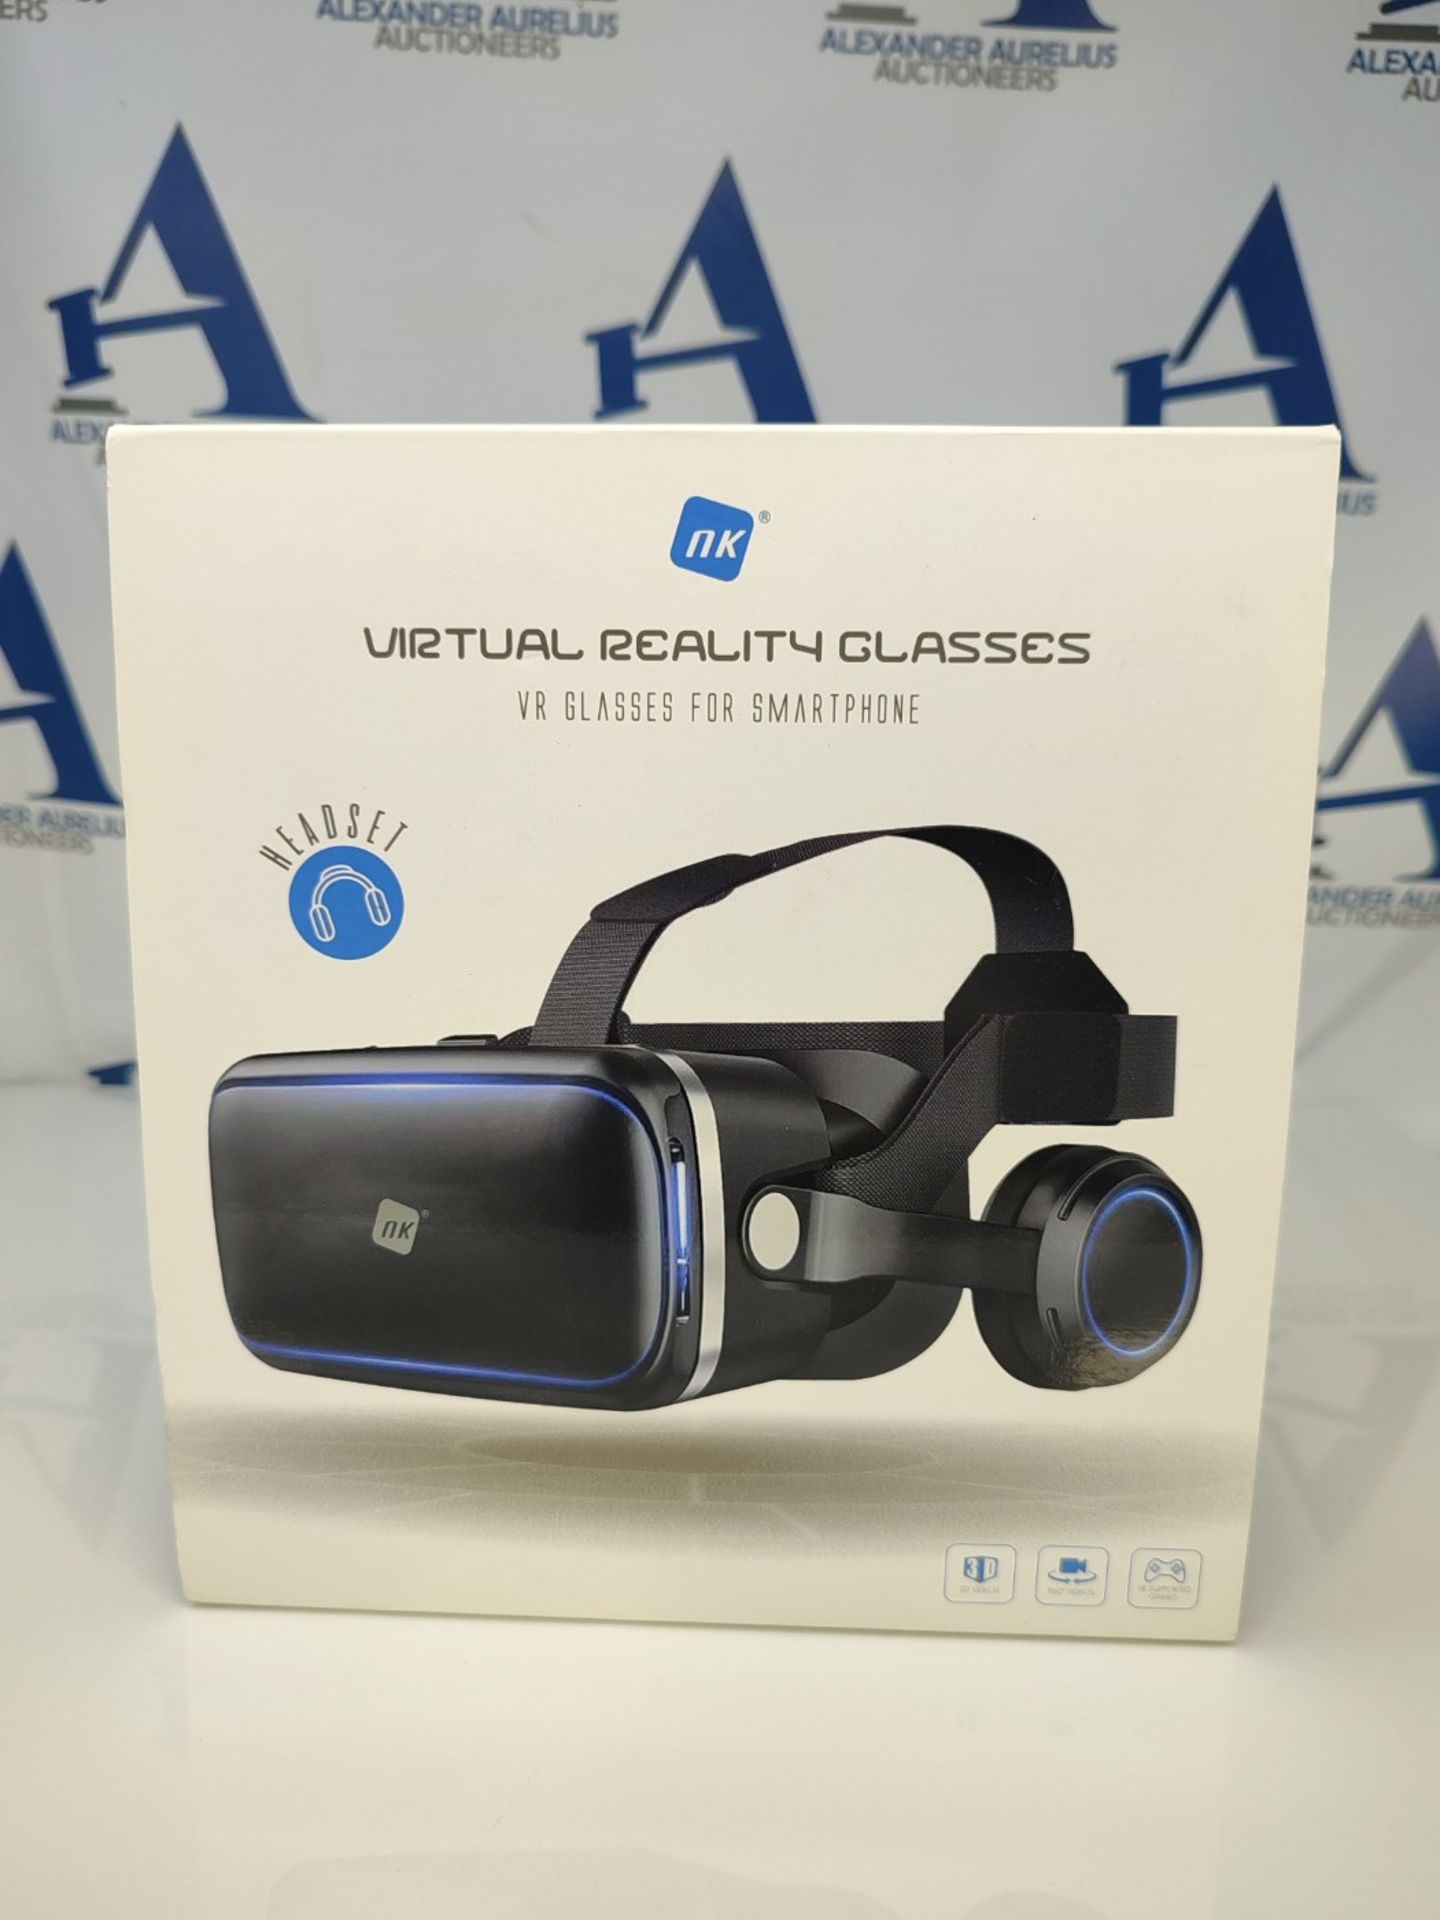 NK 3D VR Glasses for Smartphone - Intelligent Virtual Reality Viewer with Audio for Sm - Image 2 of 3